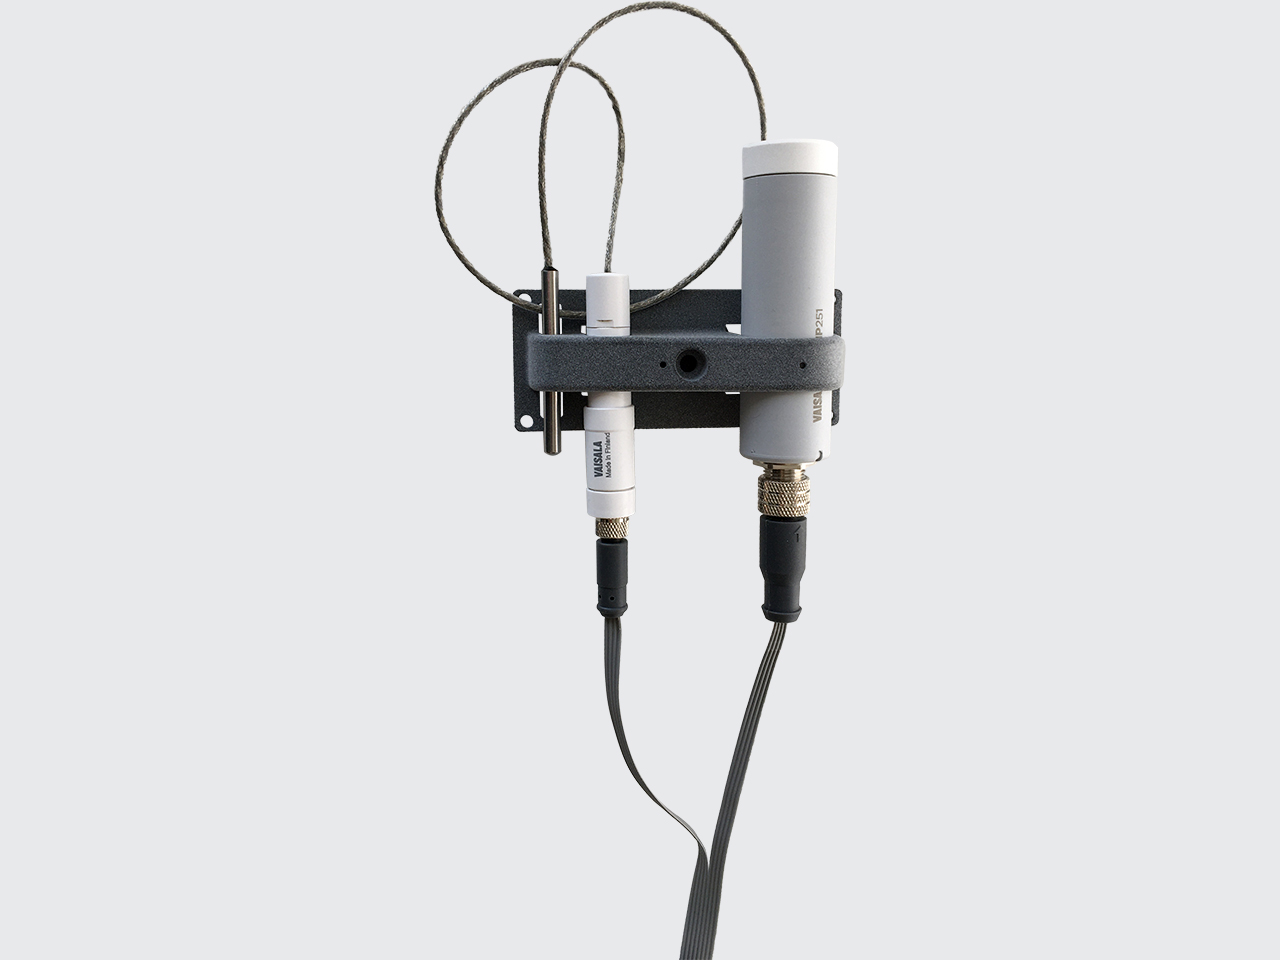 GMP251 CO2 probe mounted with temperature and humidity probes